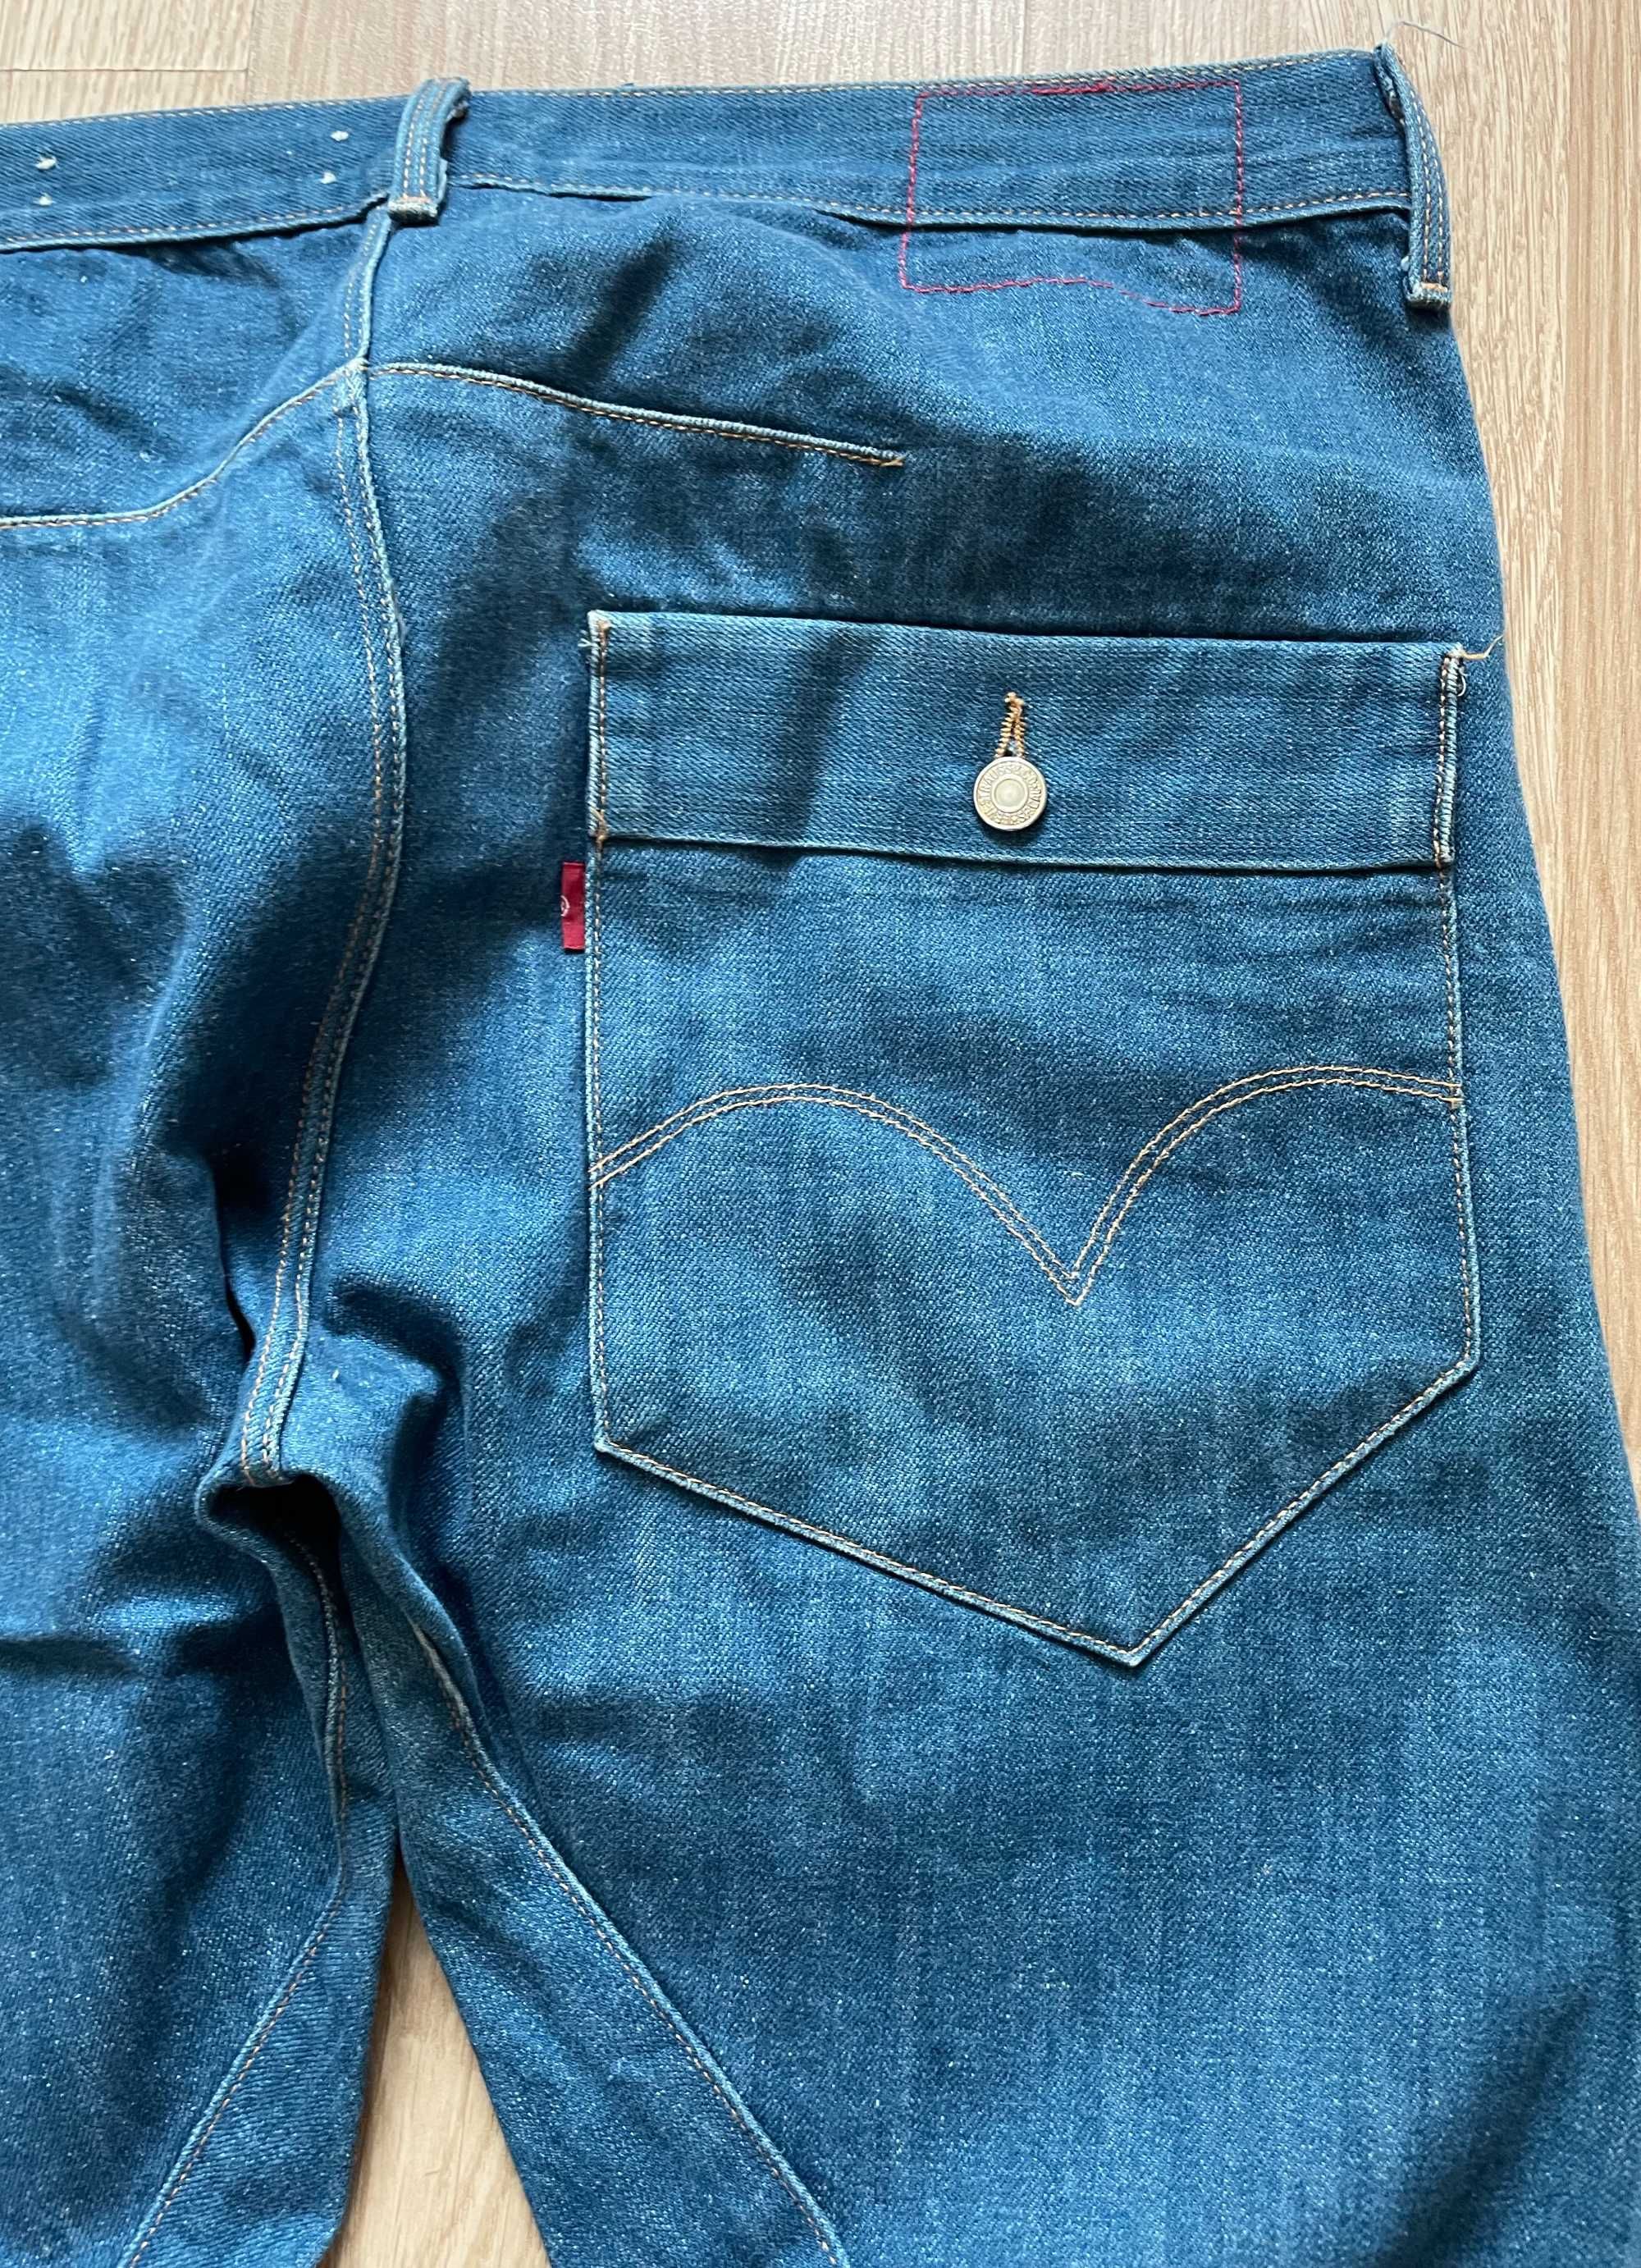 Levi's Engineered limited edition , 34 x 34 , 10th anniversary